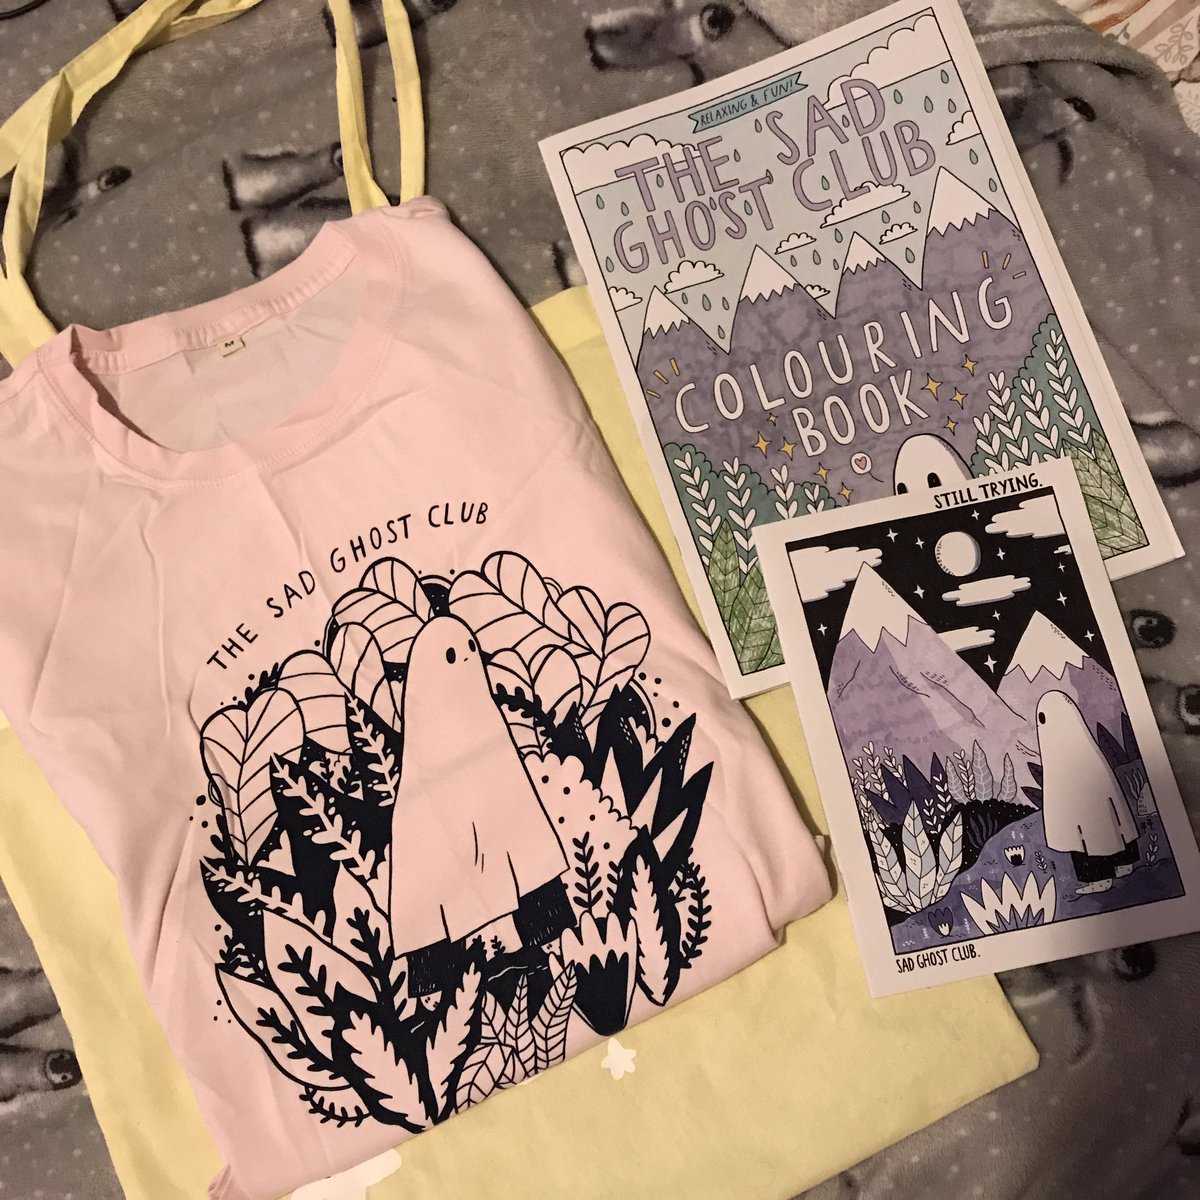 Another definite favourite is  @thesadghostclub - I’ve bought from them a few times and their lovely products always cheer me up! Their colouring book and zines are staples of my Cheer Up Box and I have a pin on my backpack (see above) http://www.thesadghostclub.com 